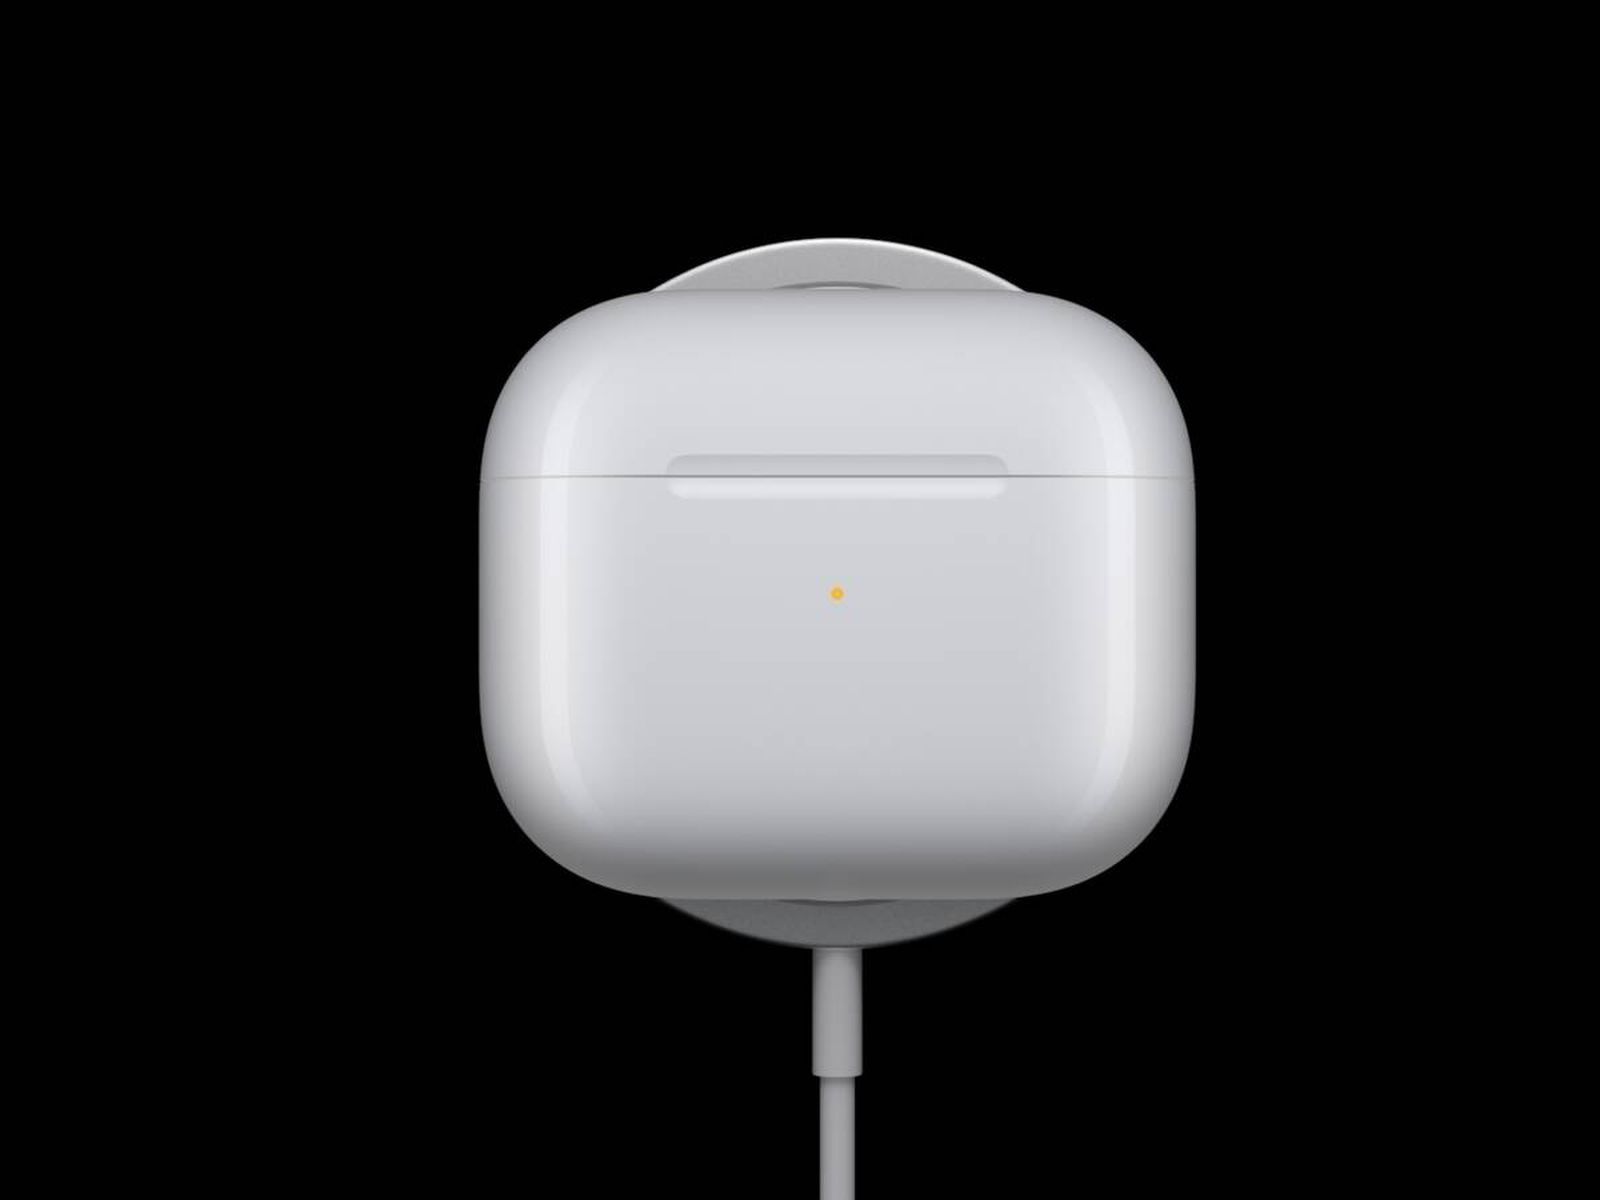 AirPods Pro Now Available With MagSafe Charging Case for Same $249 Price -  MacRumors